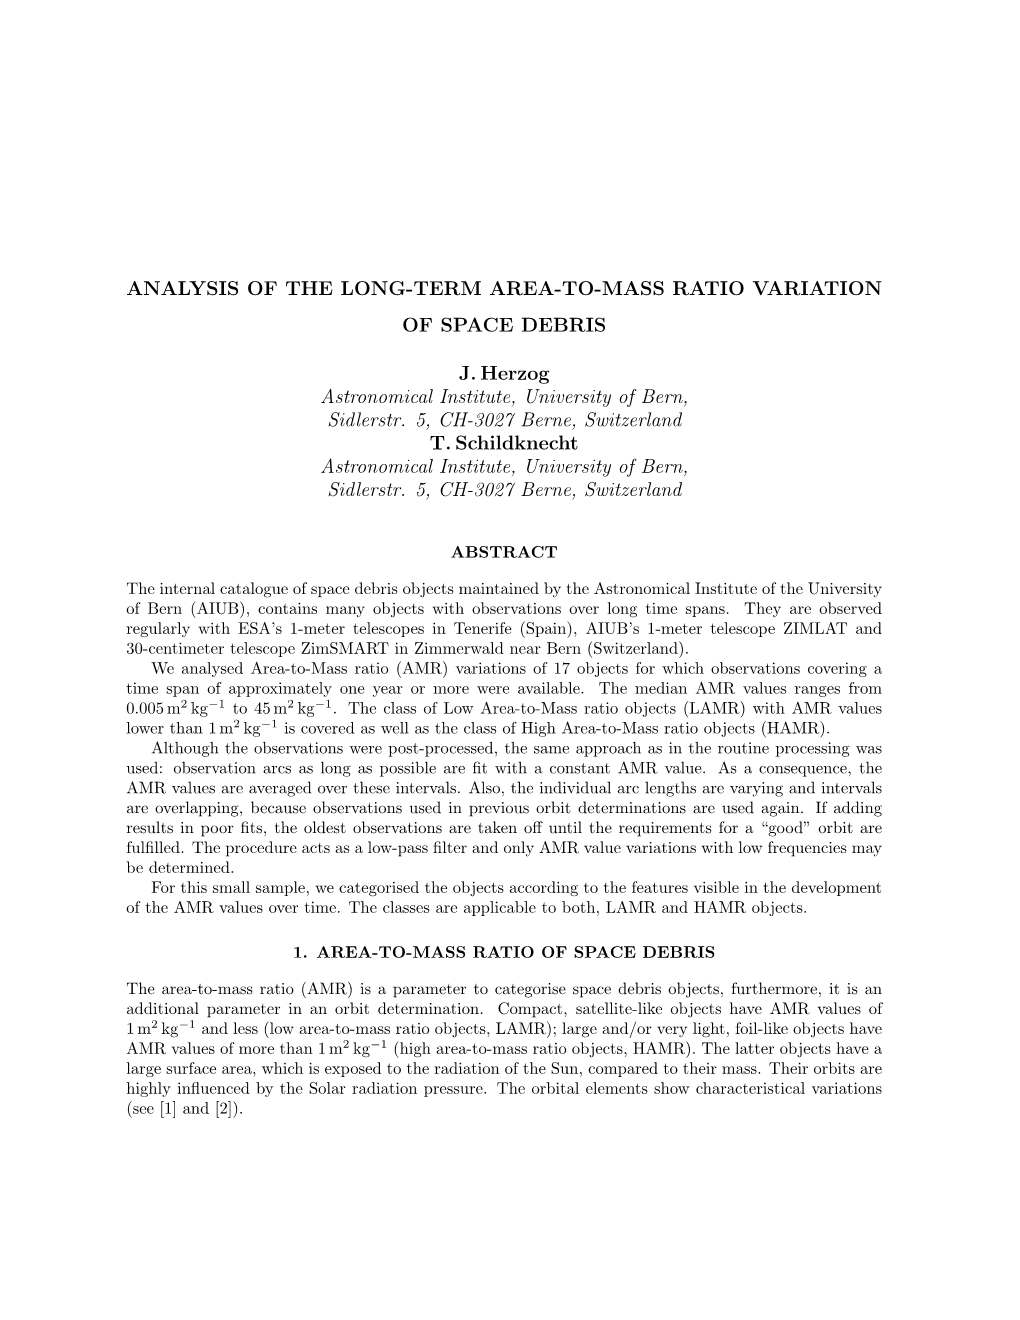 Analysis of the Long-Term Area-To-Mass Ratio Variation of Space Debris